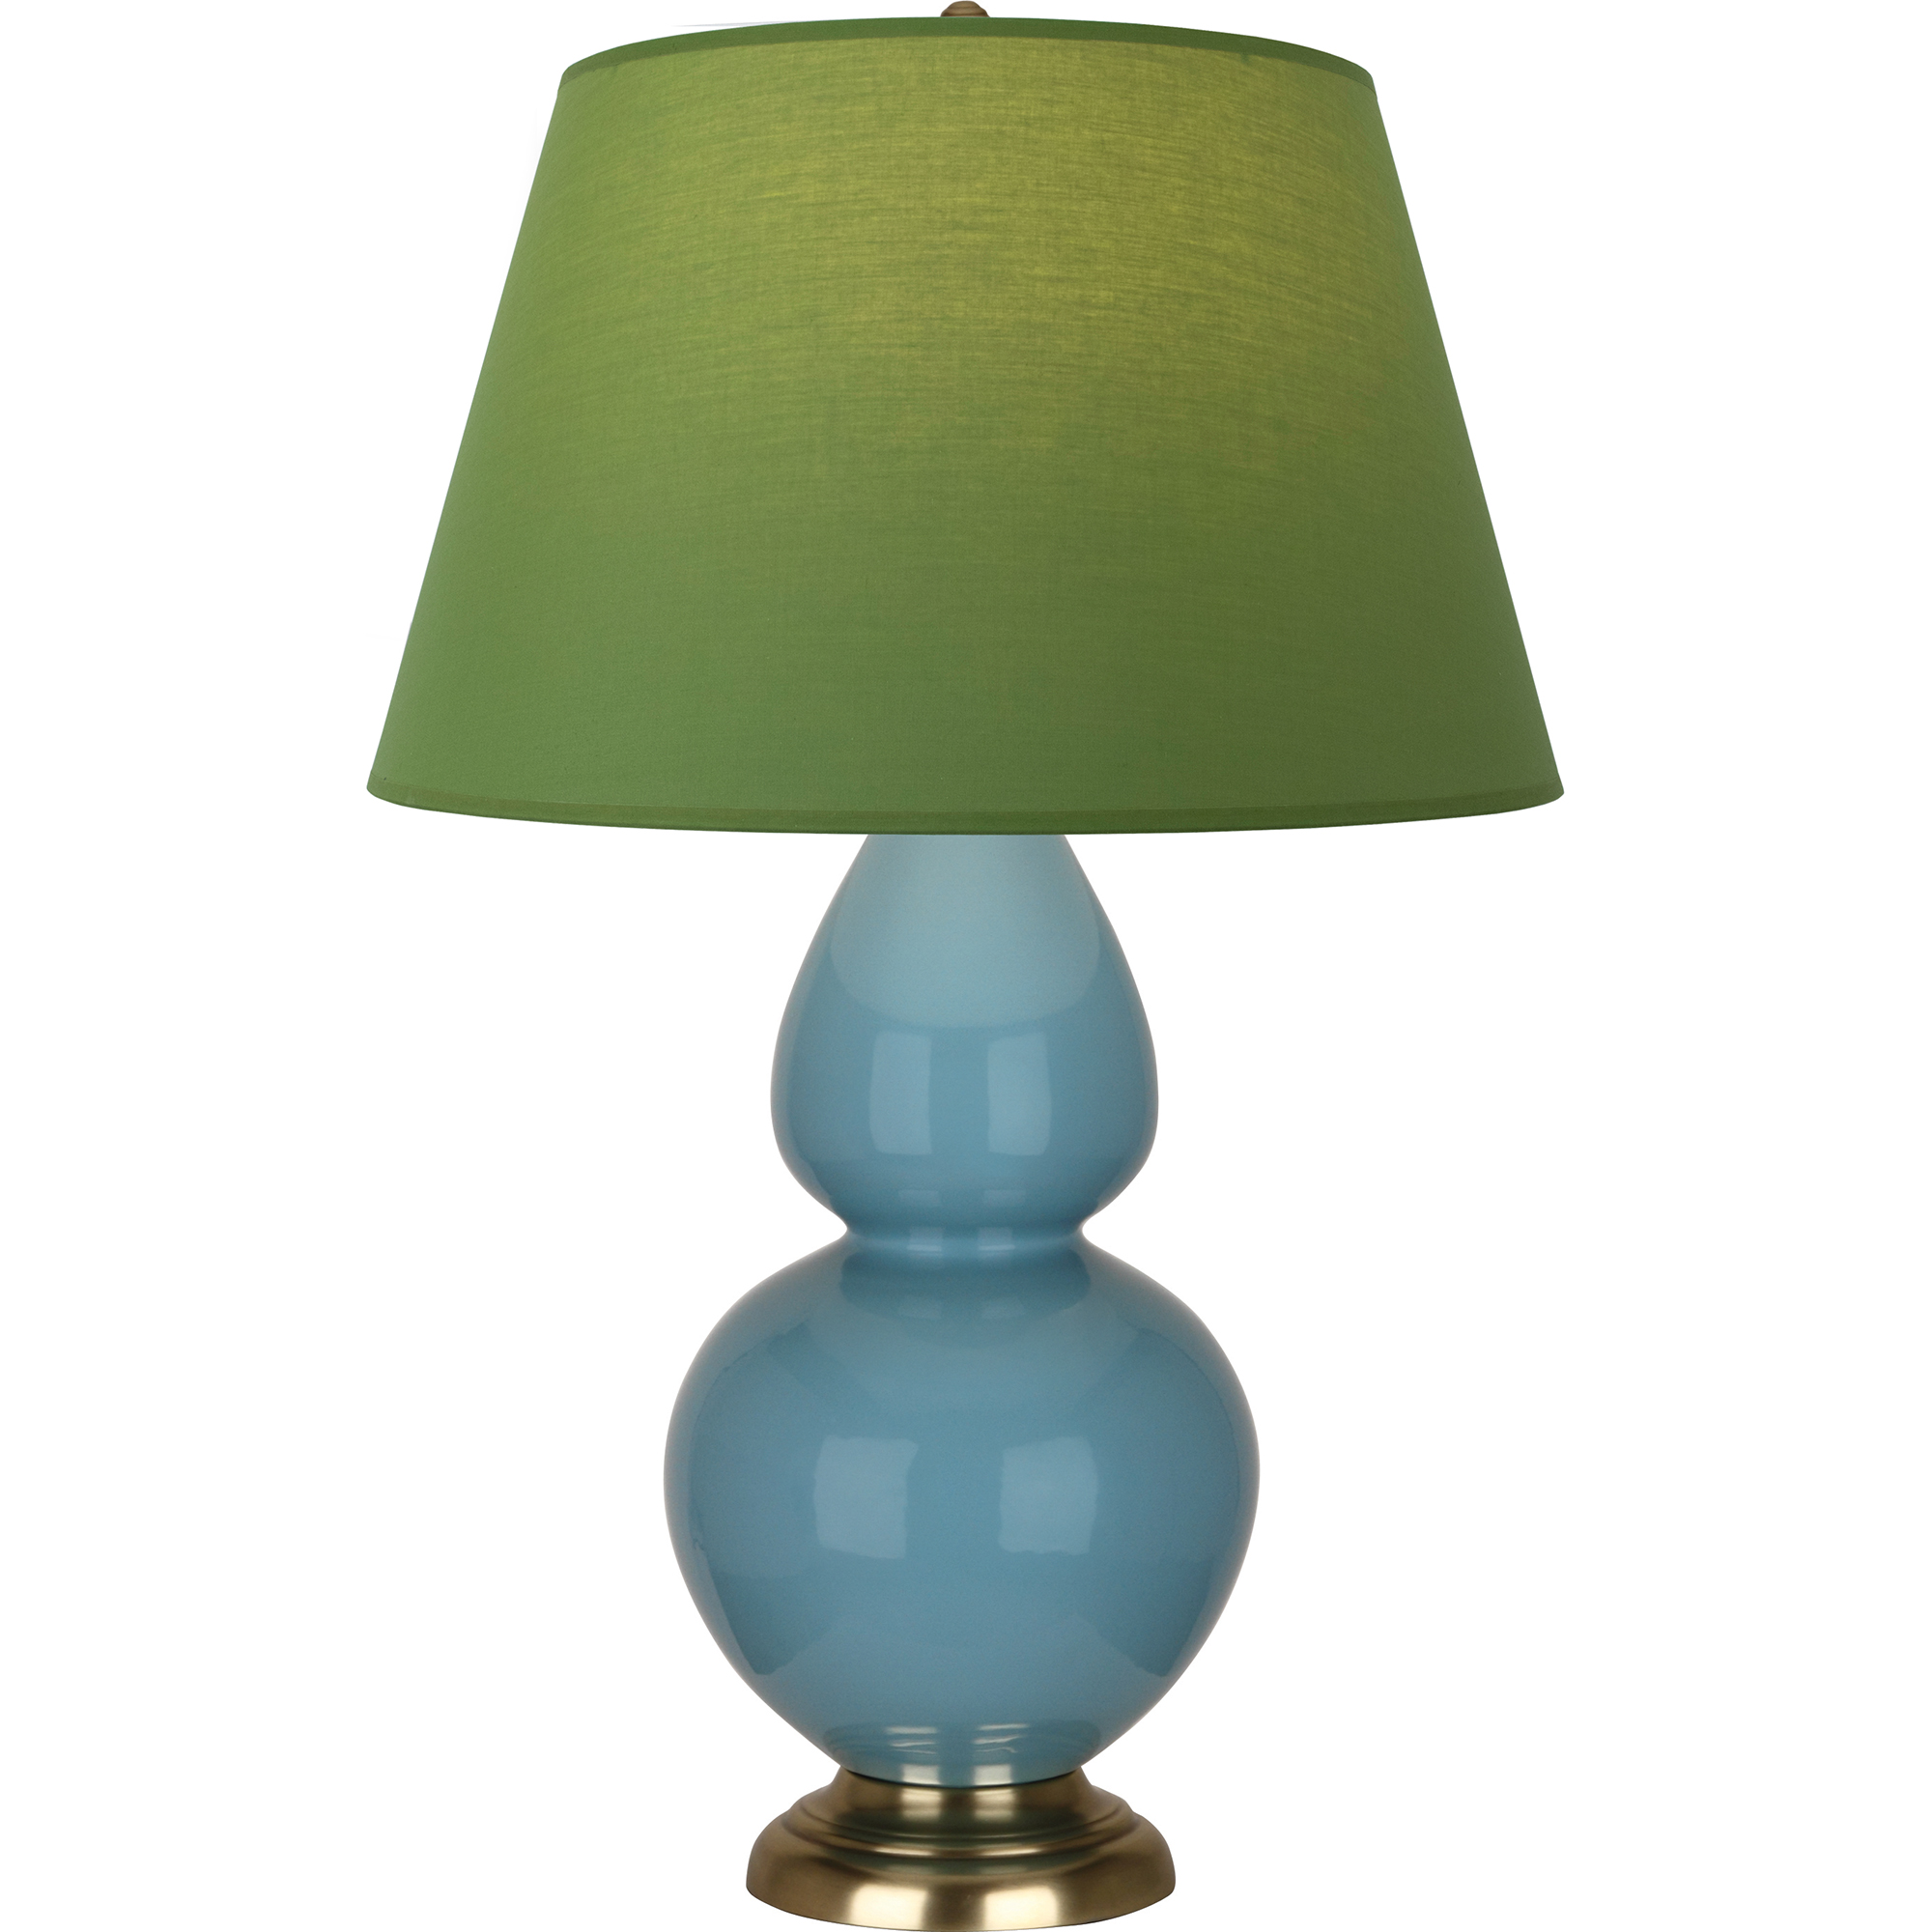 Double Gourd Table Lamp Style #OB20G